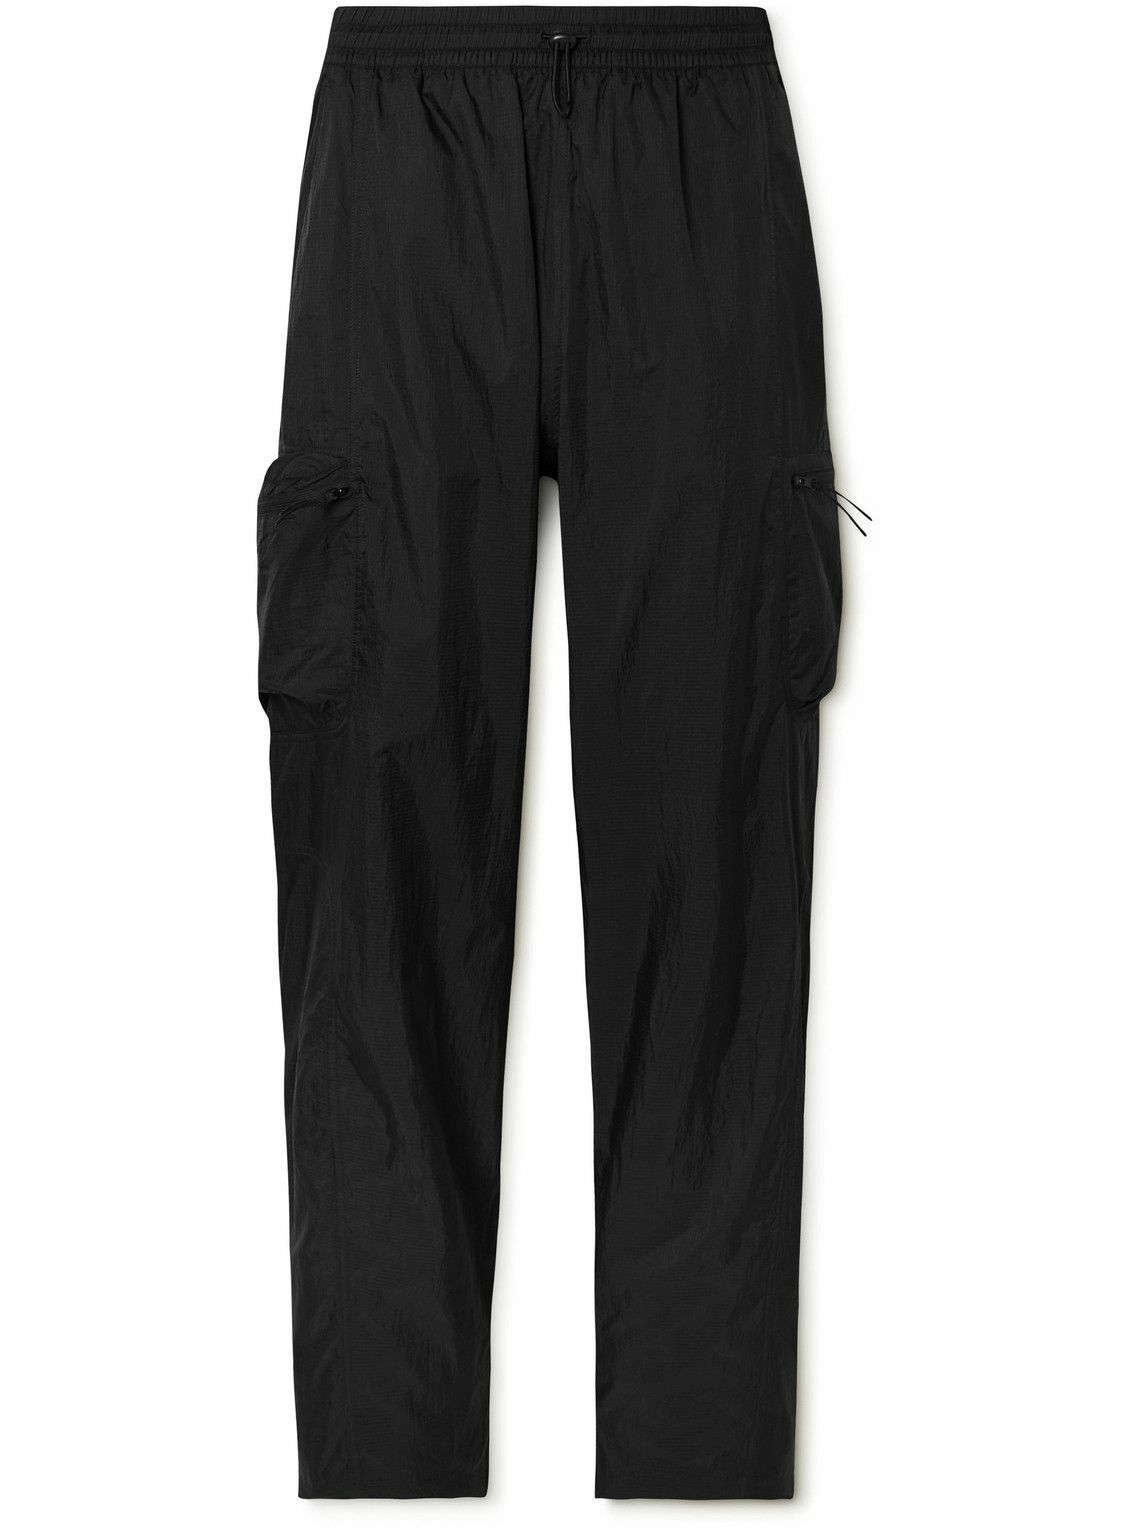 Outdoor Voices - Windbreaker Ripstop Drawstring Trousers - Black